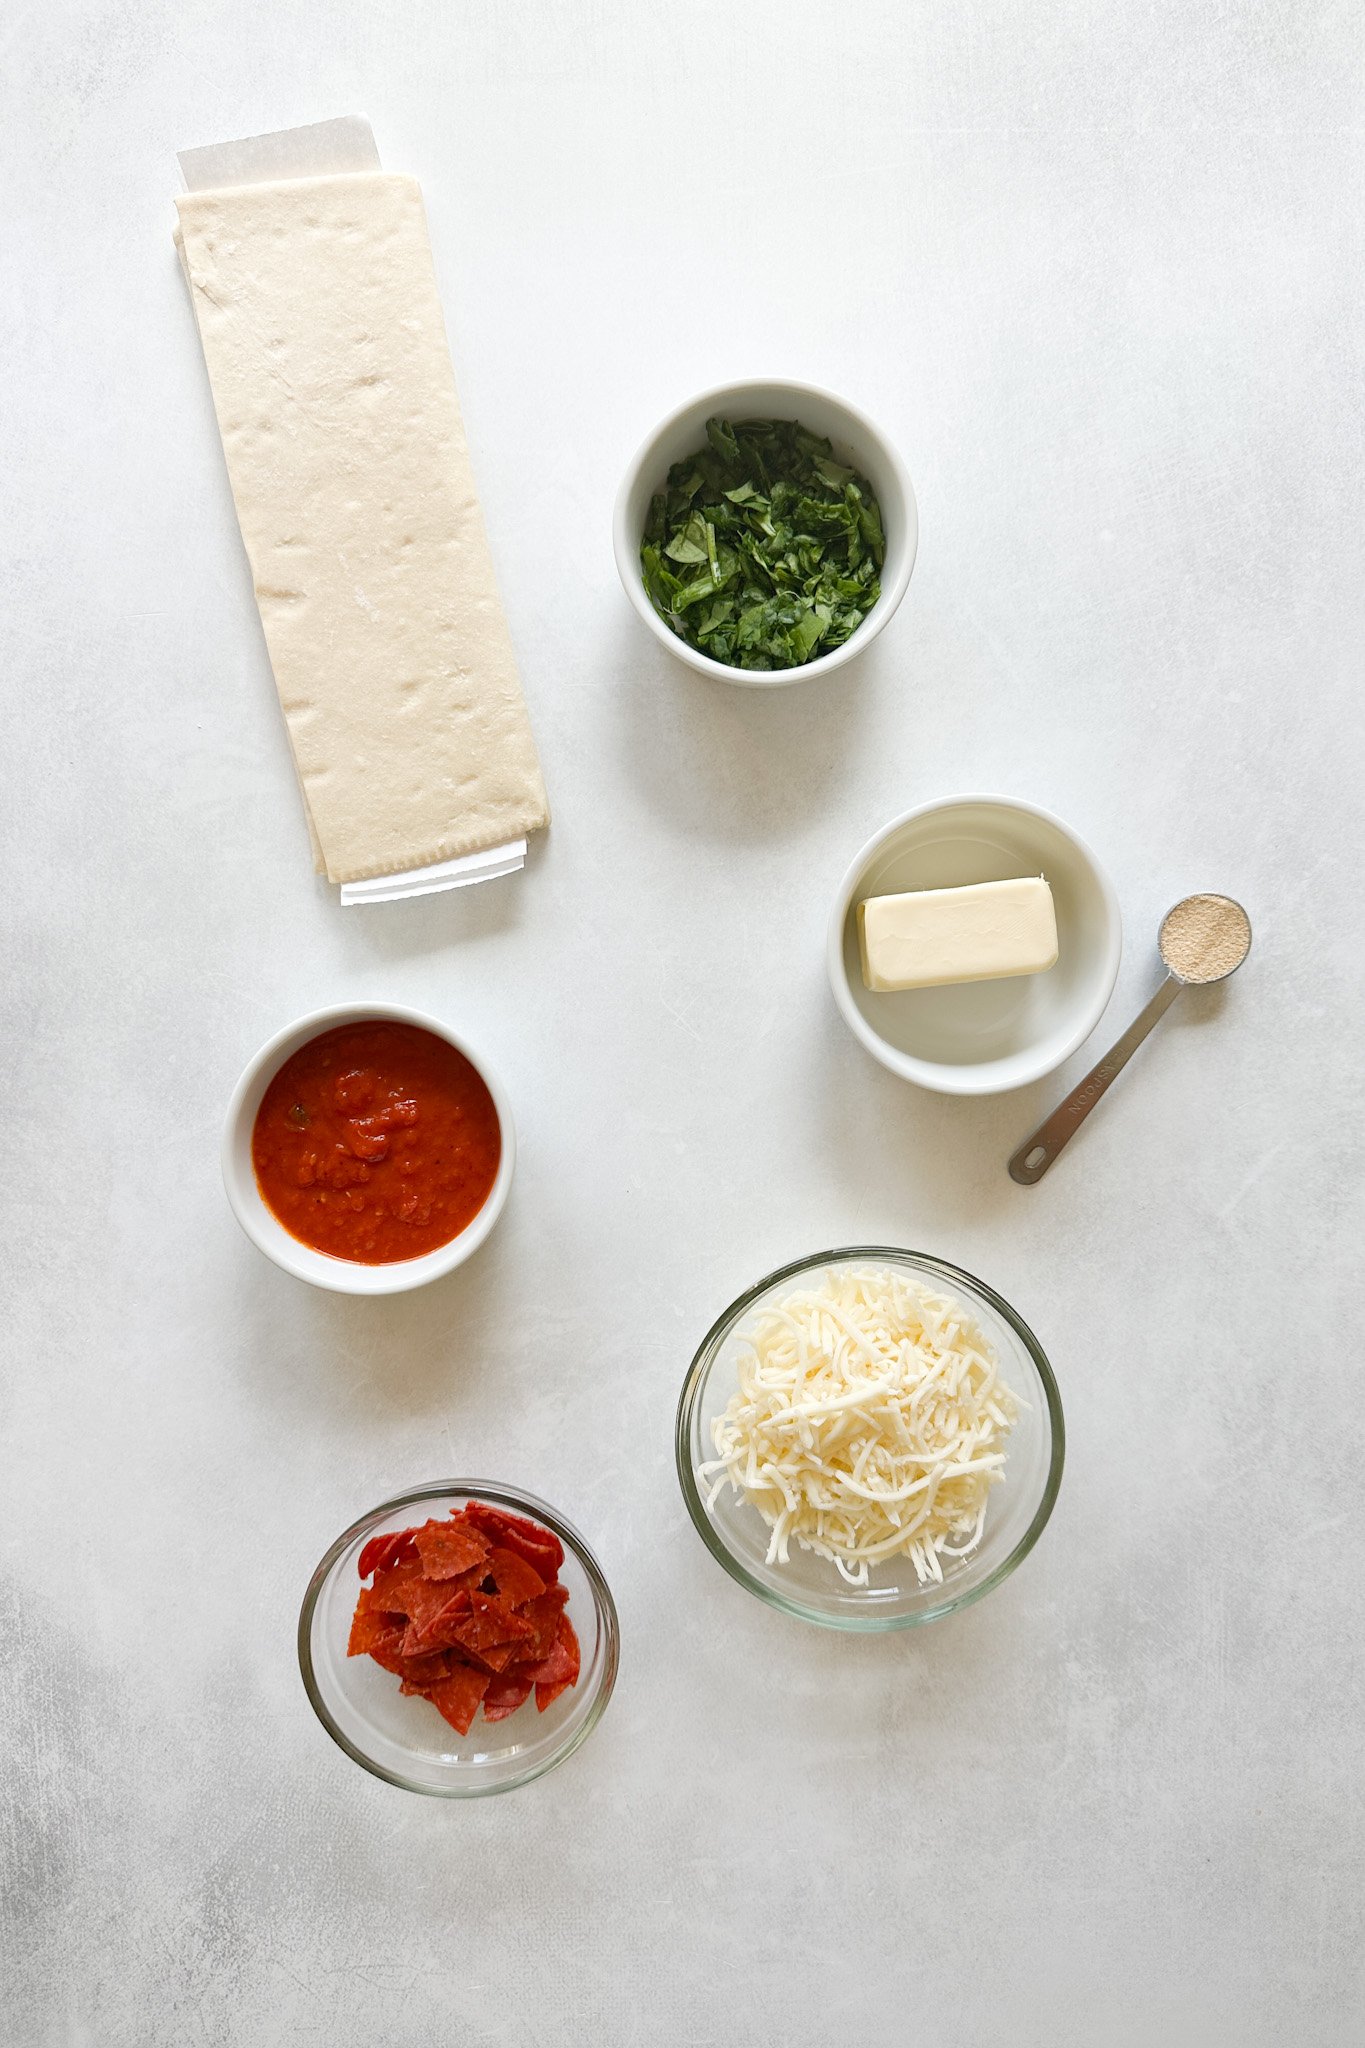 Ingredients to make puff pastry pizza pockets.